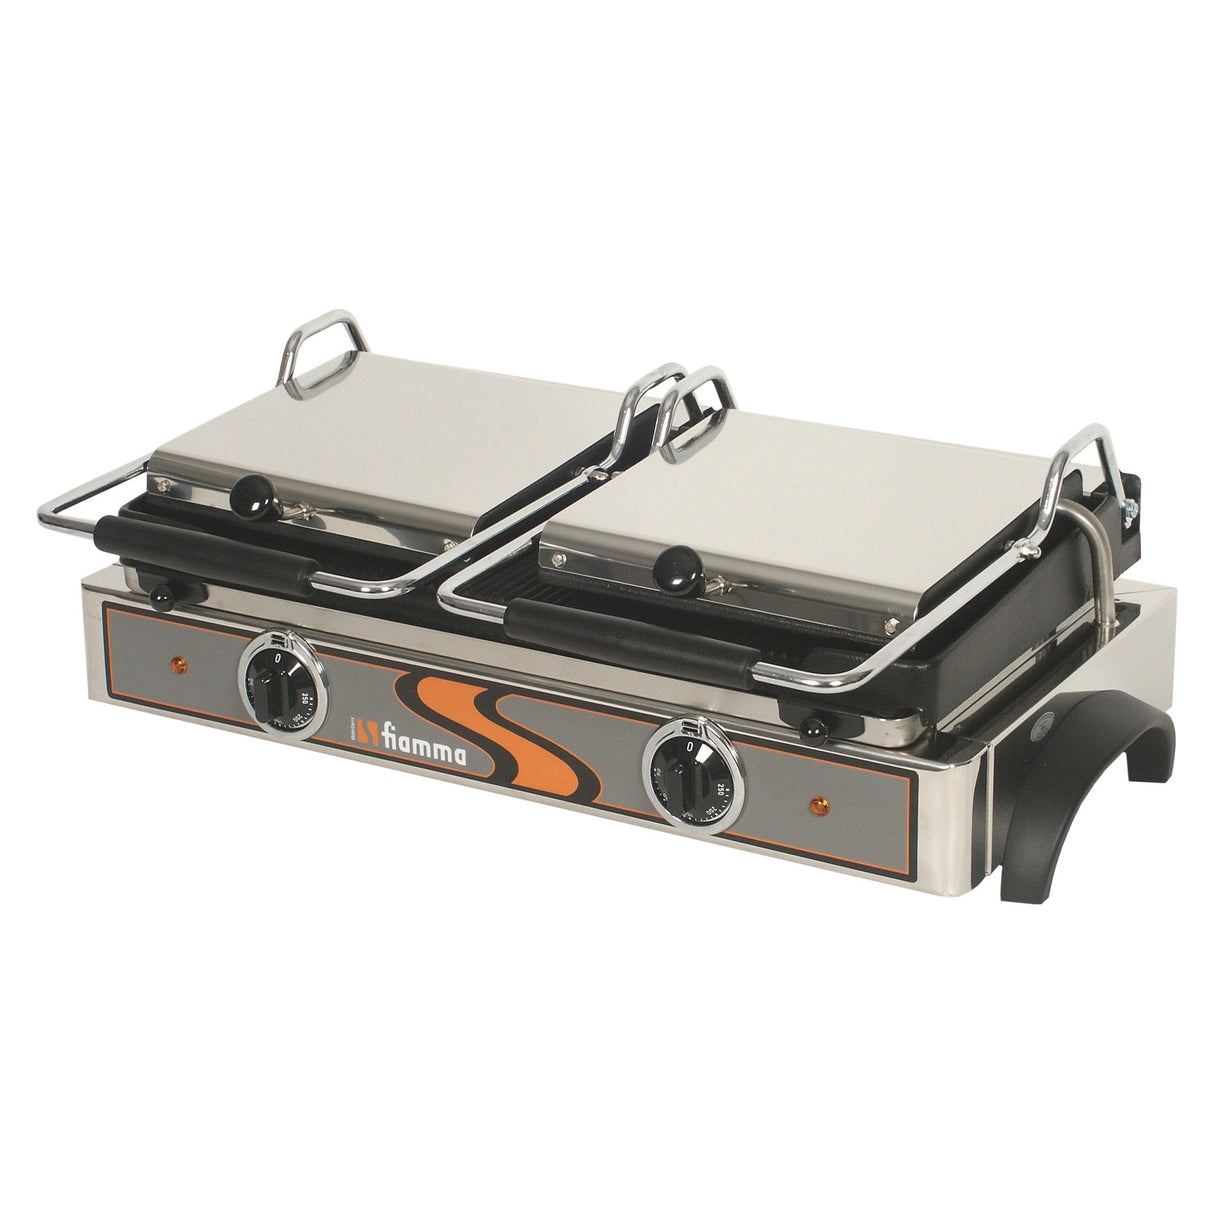 GR 8.2L DOUBLE CONTACT GRILL - Grooved Upper/Smooth Lower Plates